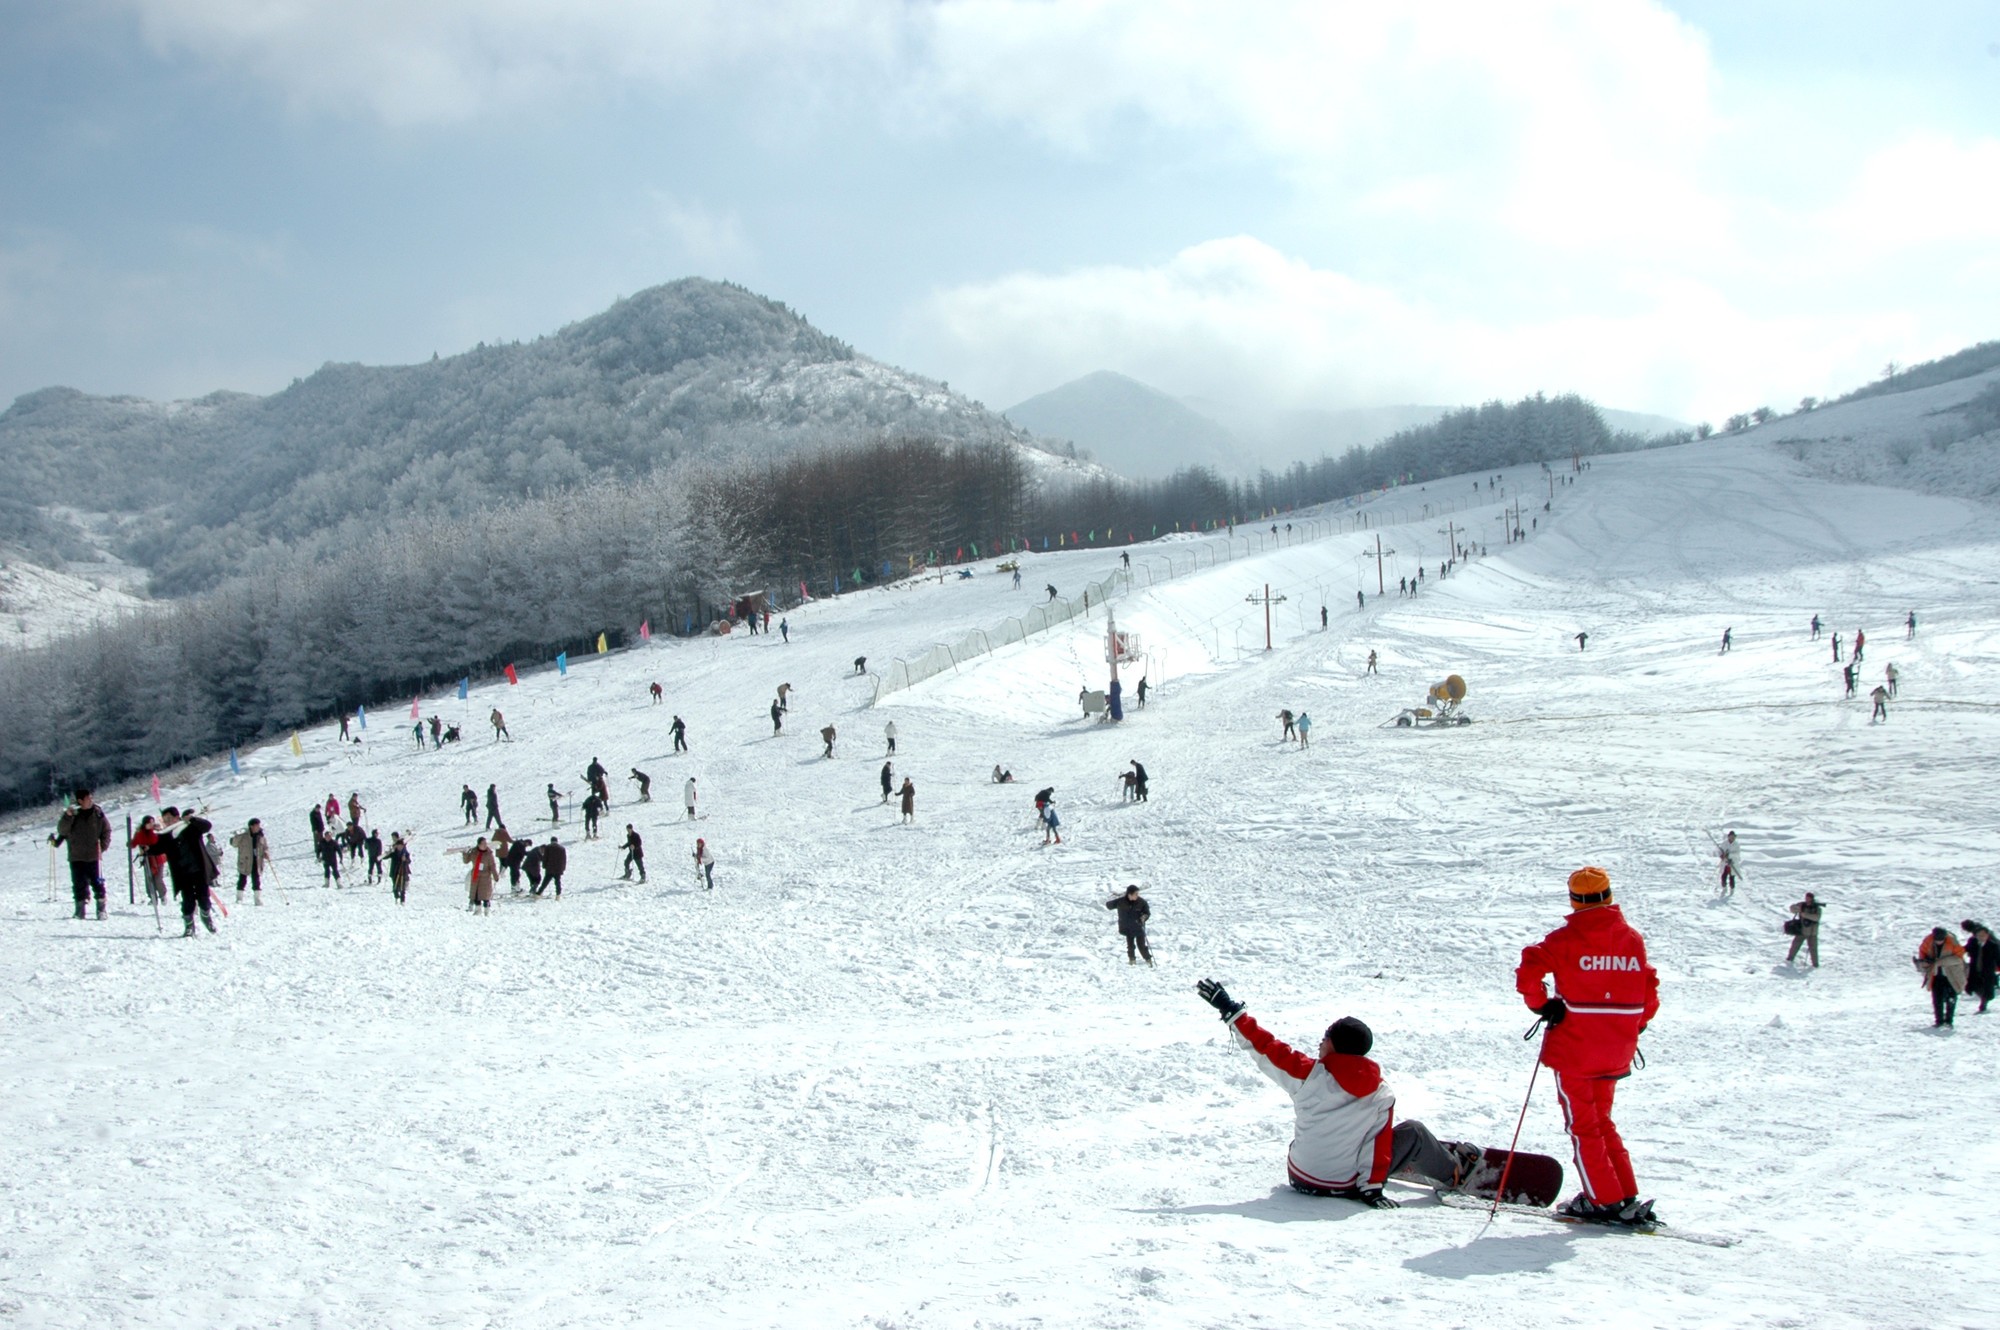 Club Med is developing the flow from China to Europe, with 20 ski resorts in the French, Italian and Swiss Alps. Photo: wh-china.com